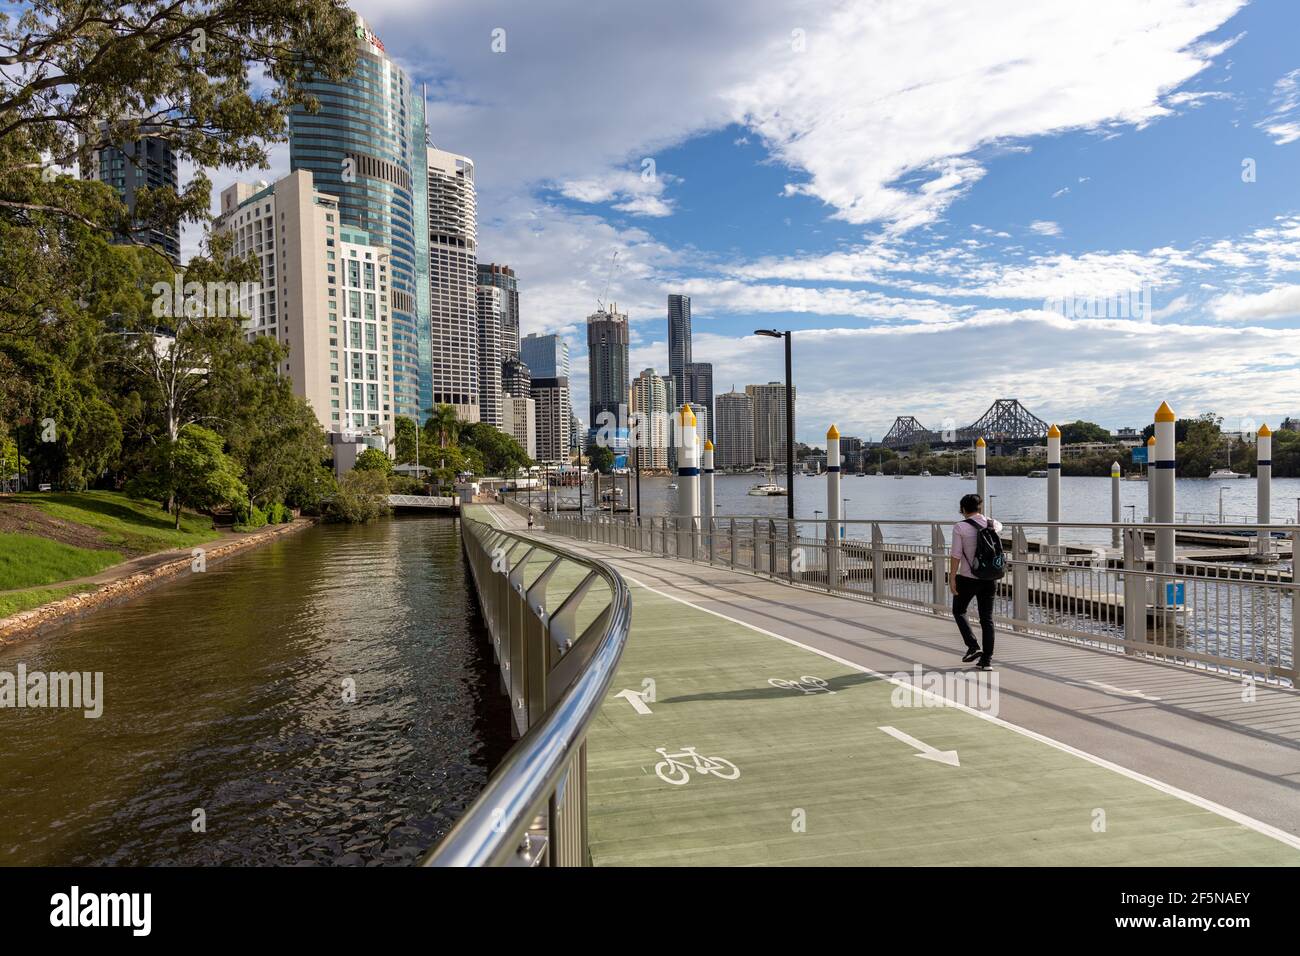 The iconic riverwalk and Brisbane Cityscape along the Brisbane River in Queensland on March 24th 2021 Stock Photo